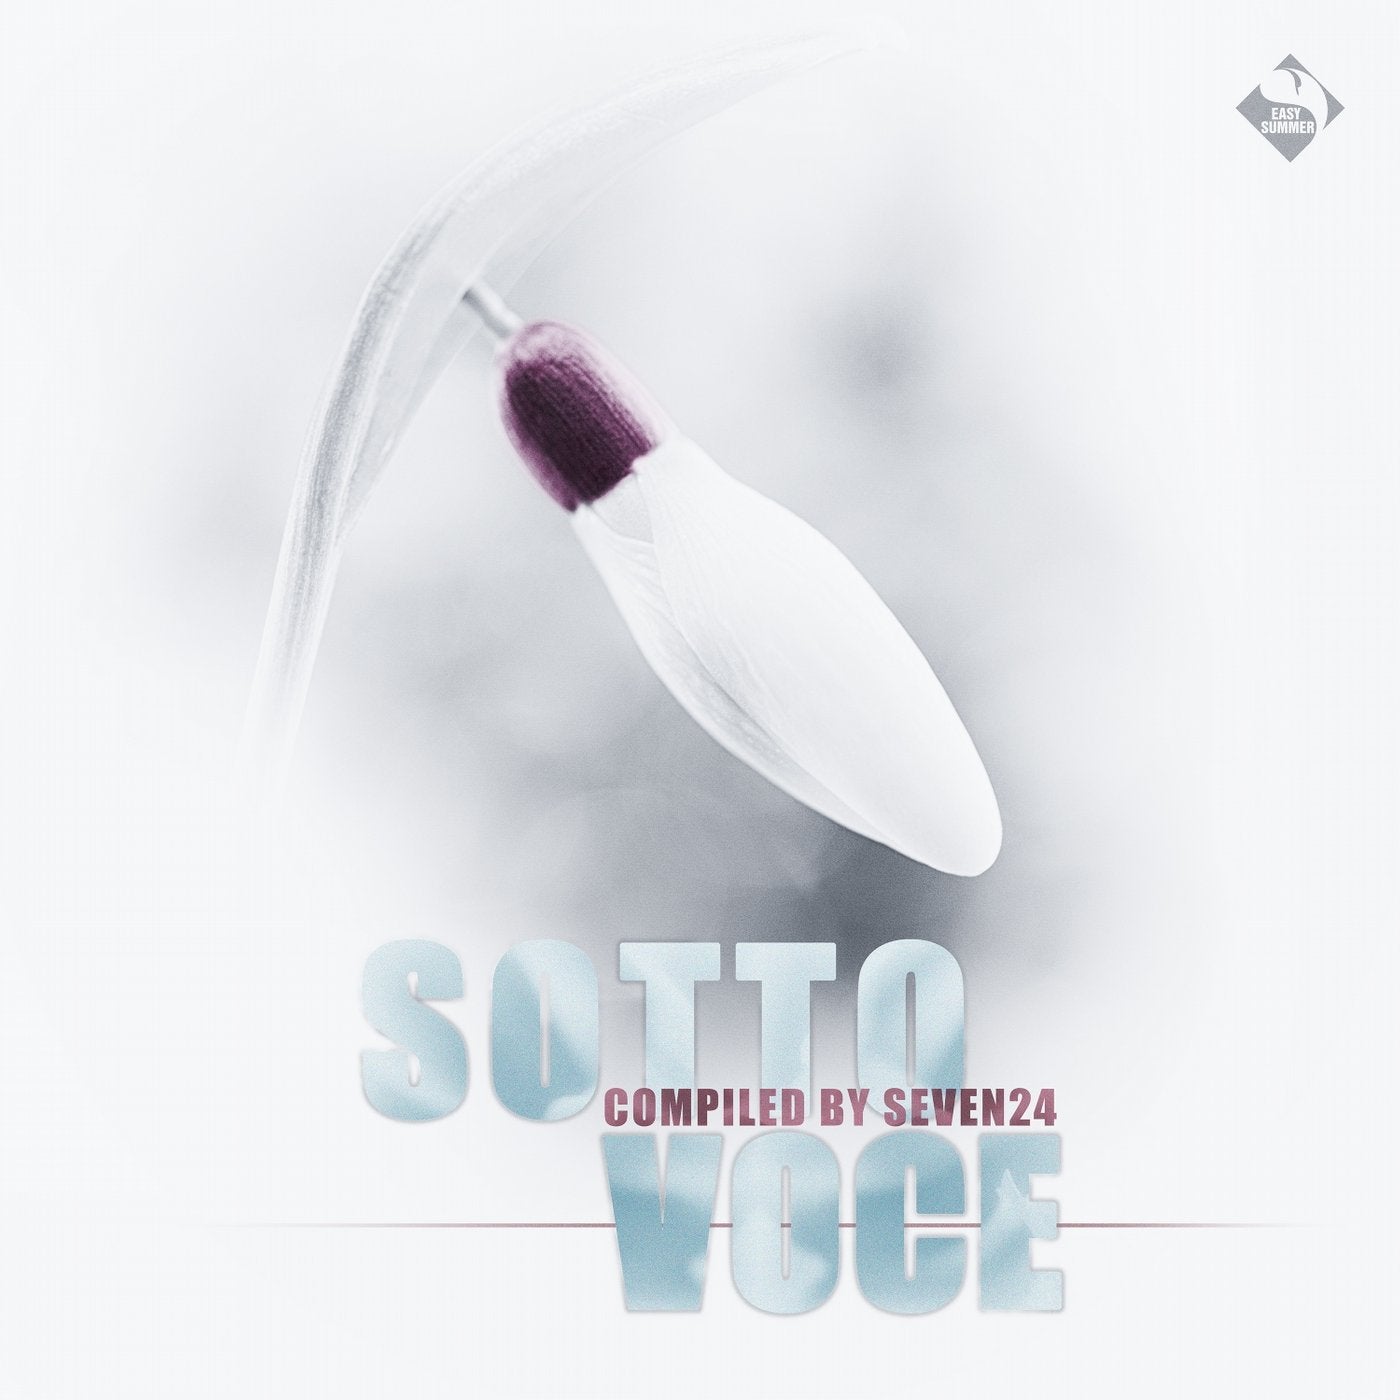 Sotto Voce, Vol.2 (Compiled by Seven24)